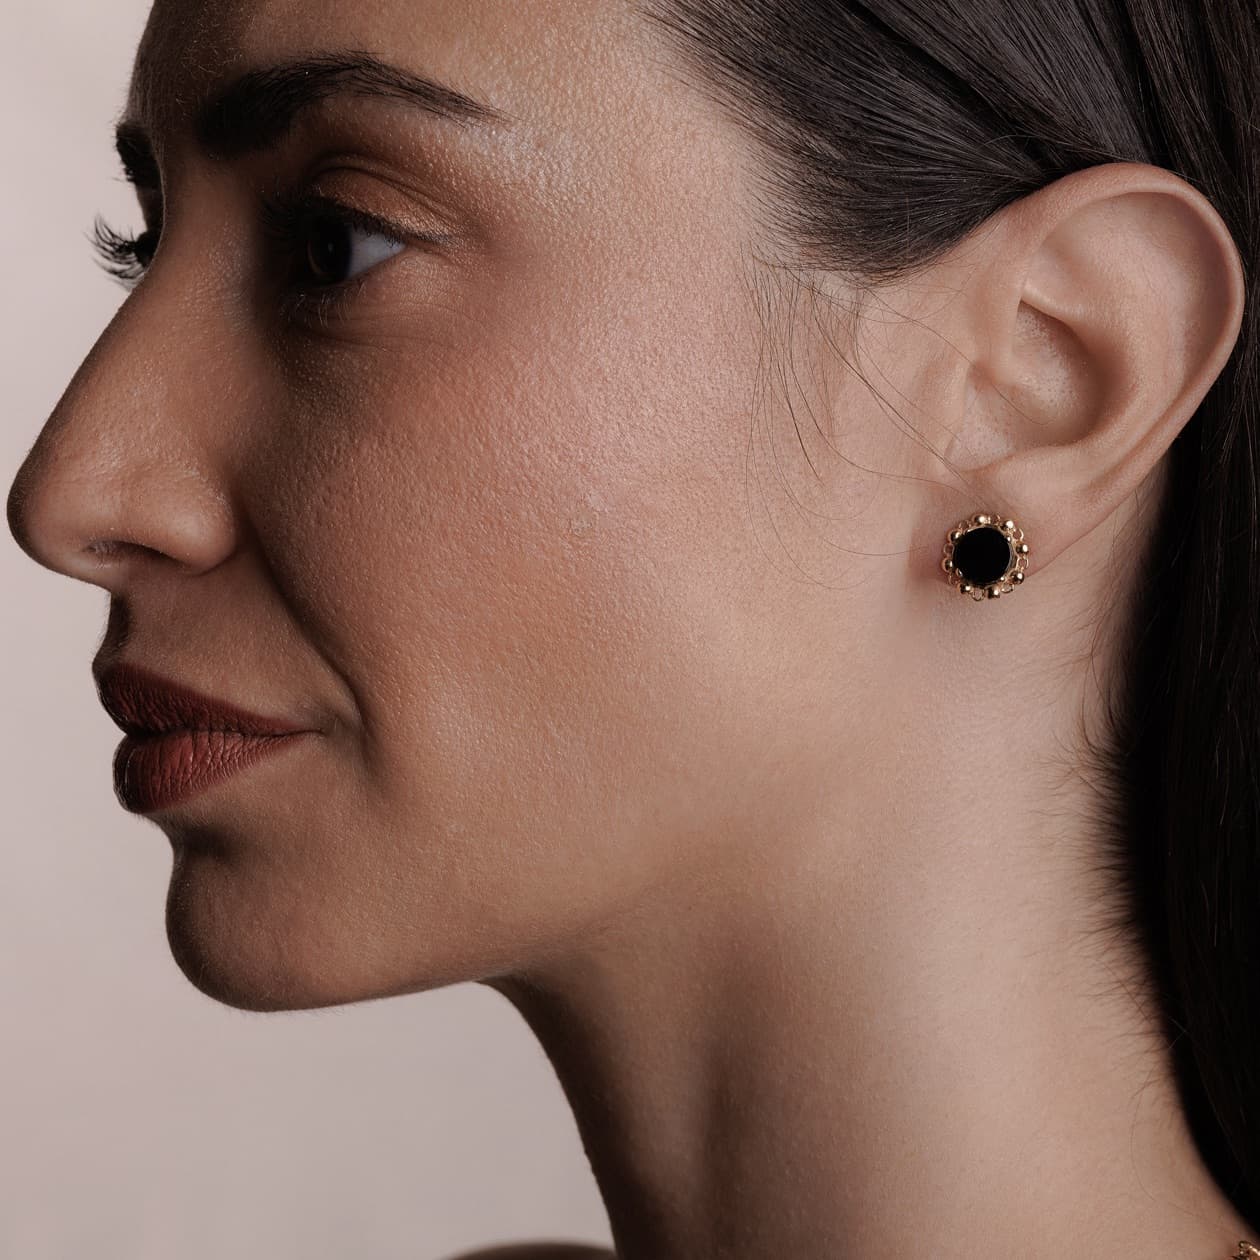 Petite Piazza Stud Earrings in Gold with Onyx